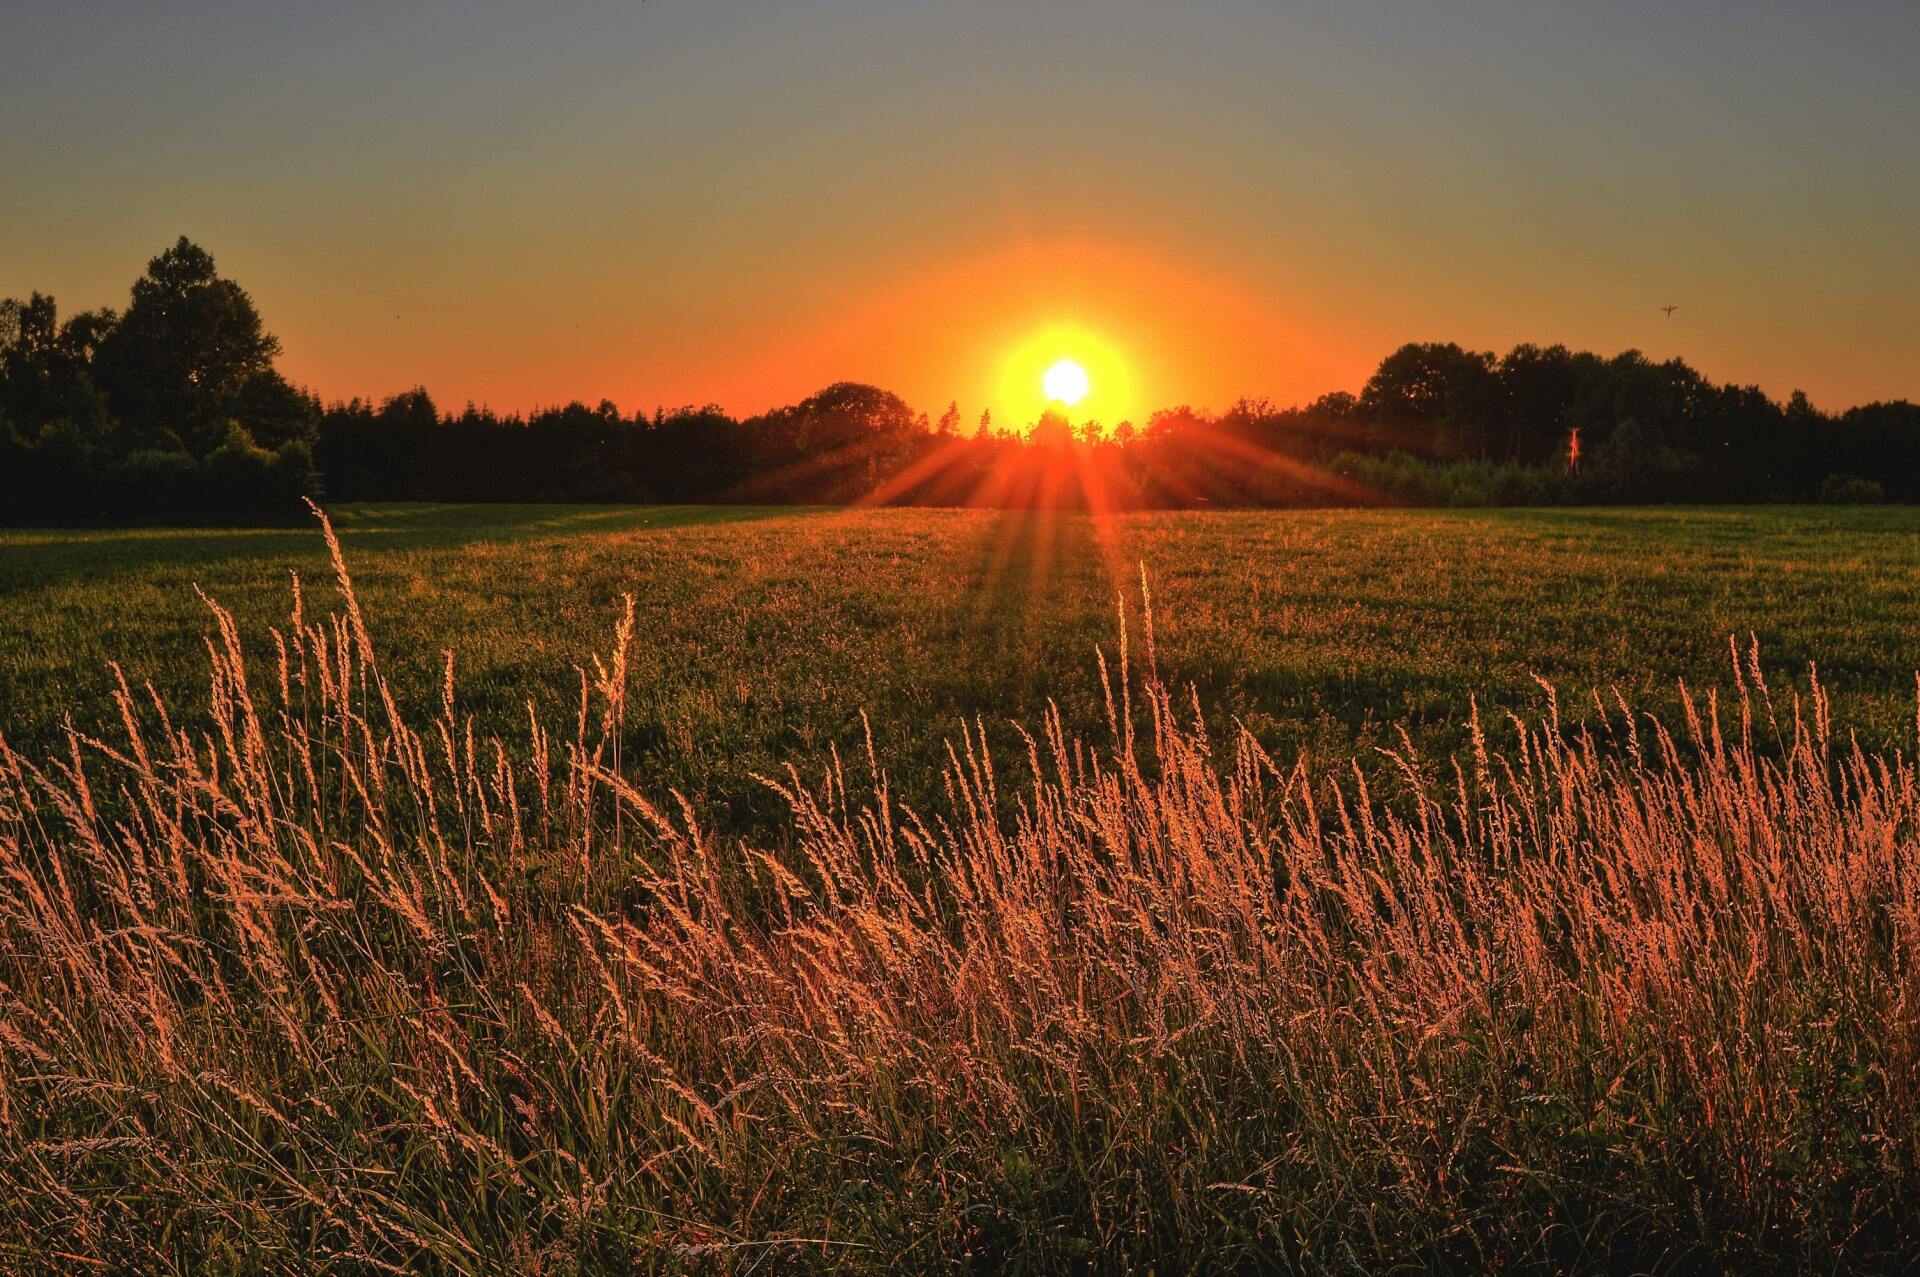 The sun is setting over a field of tall grass